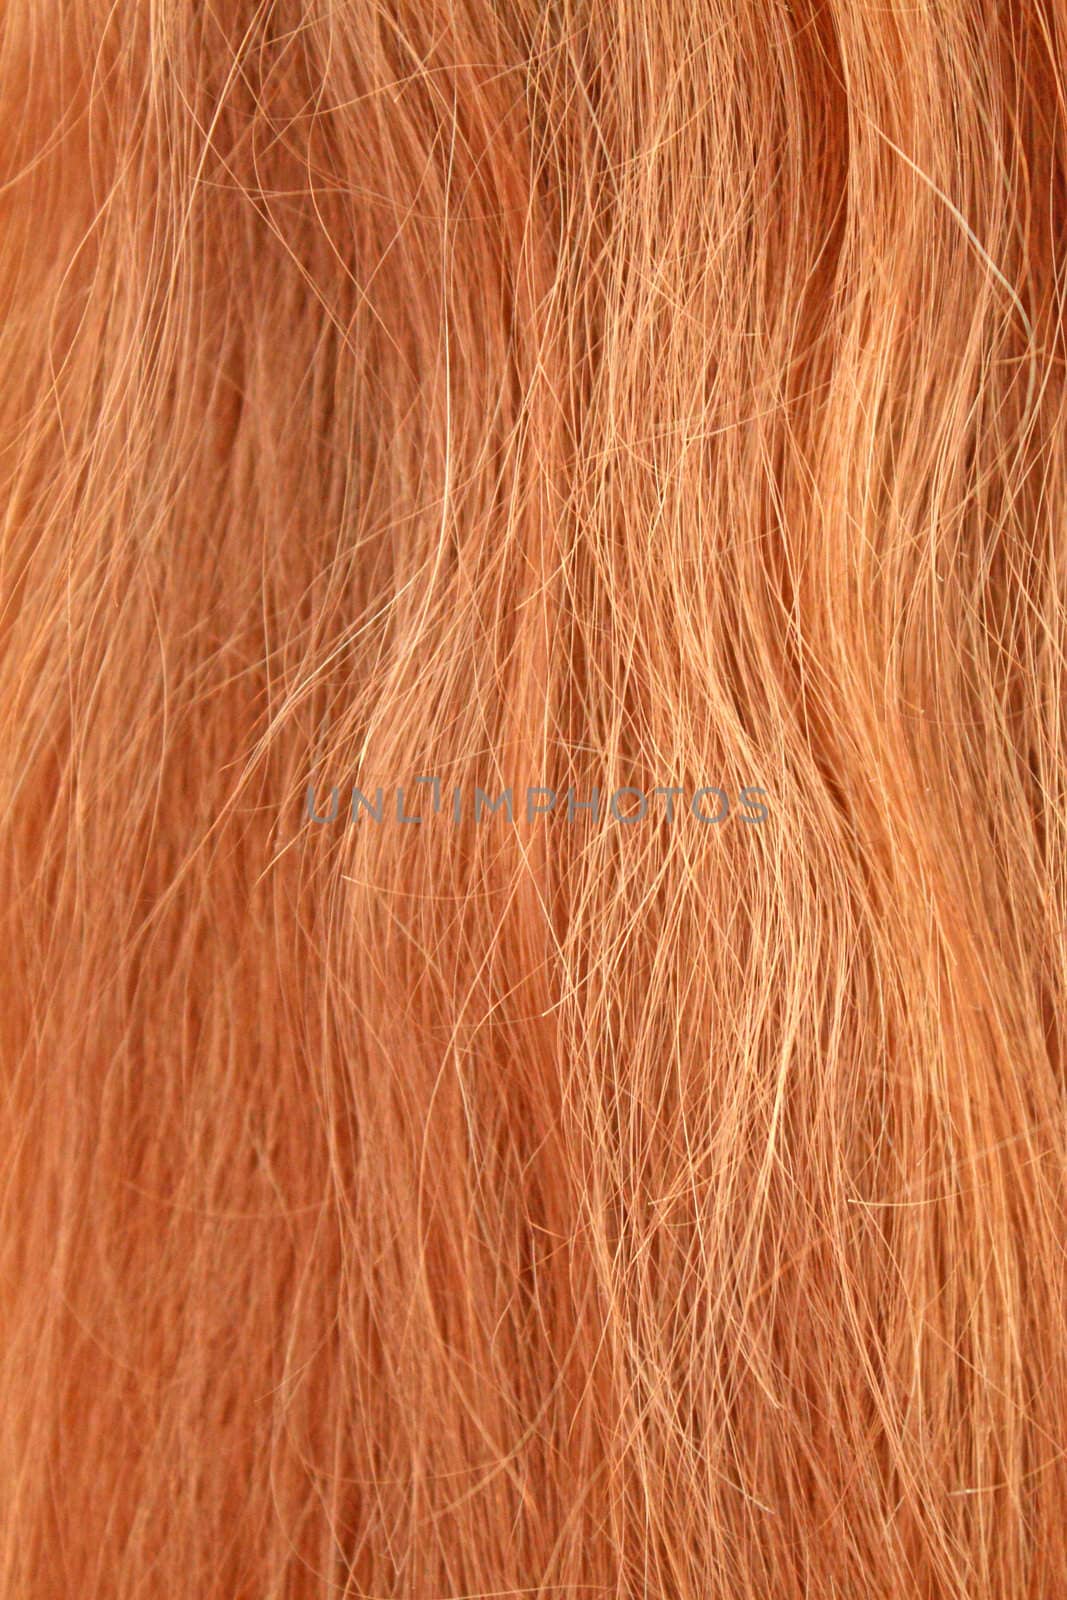 May be used for advertising hair paint, vitamins, products for health